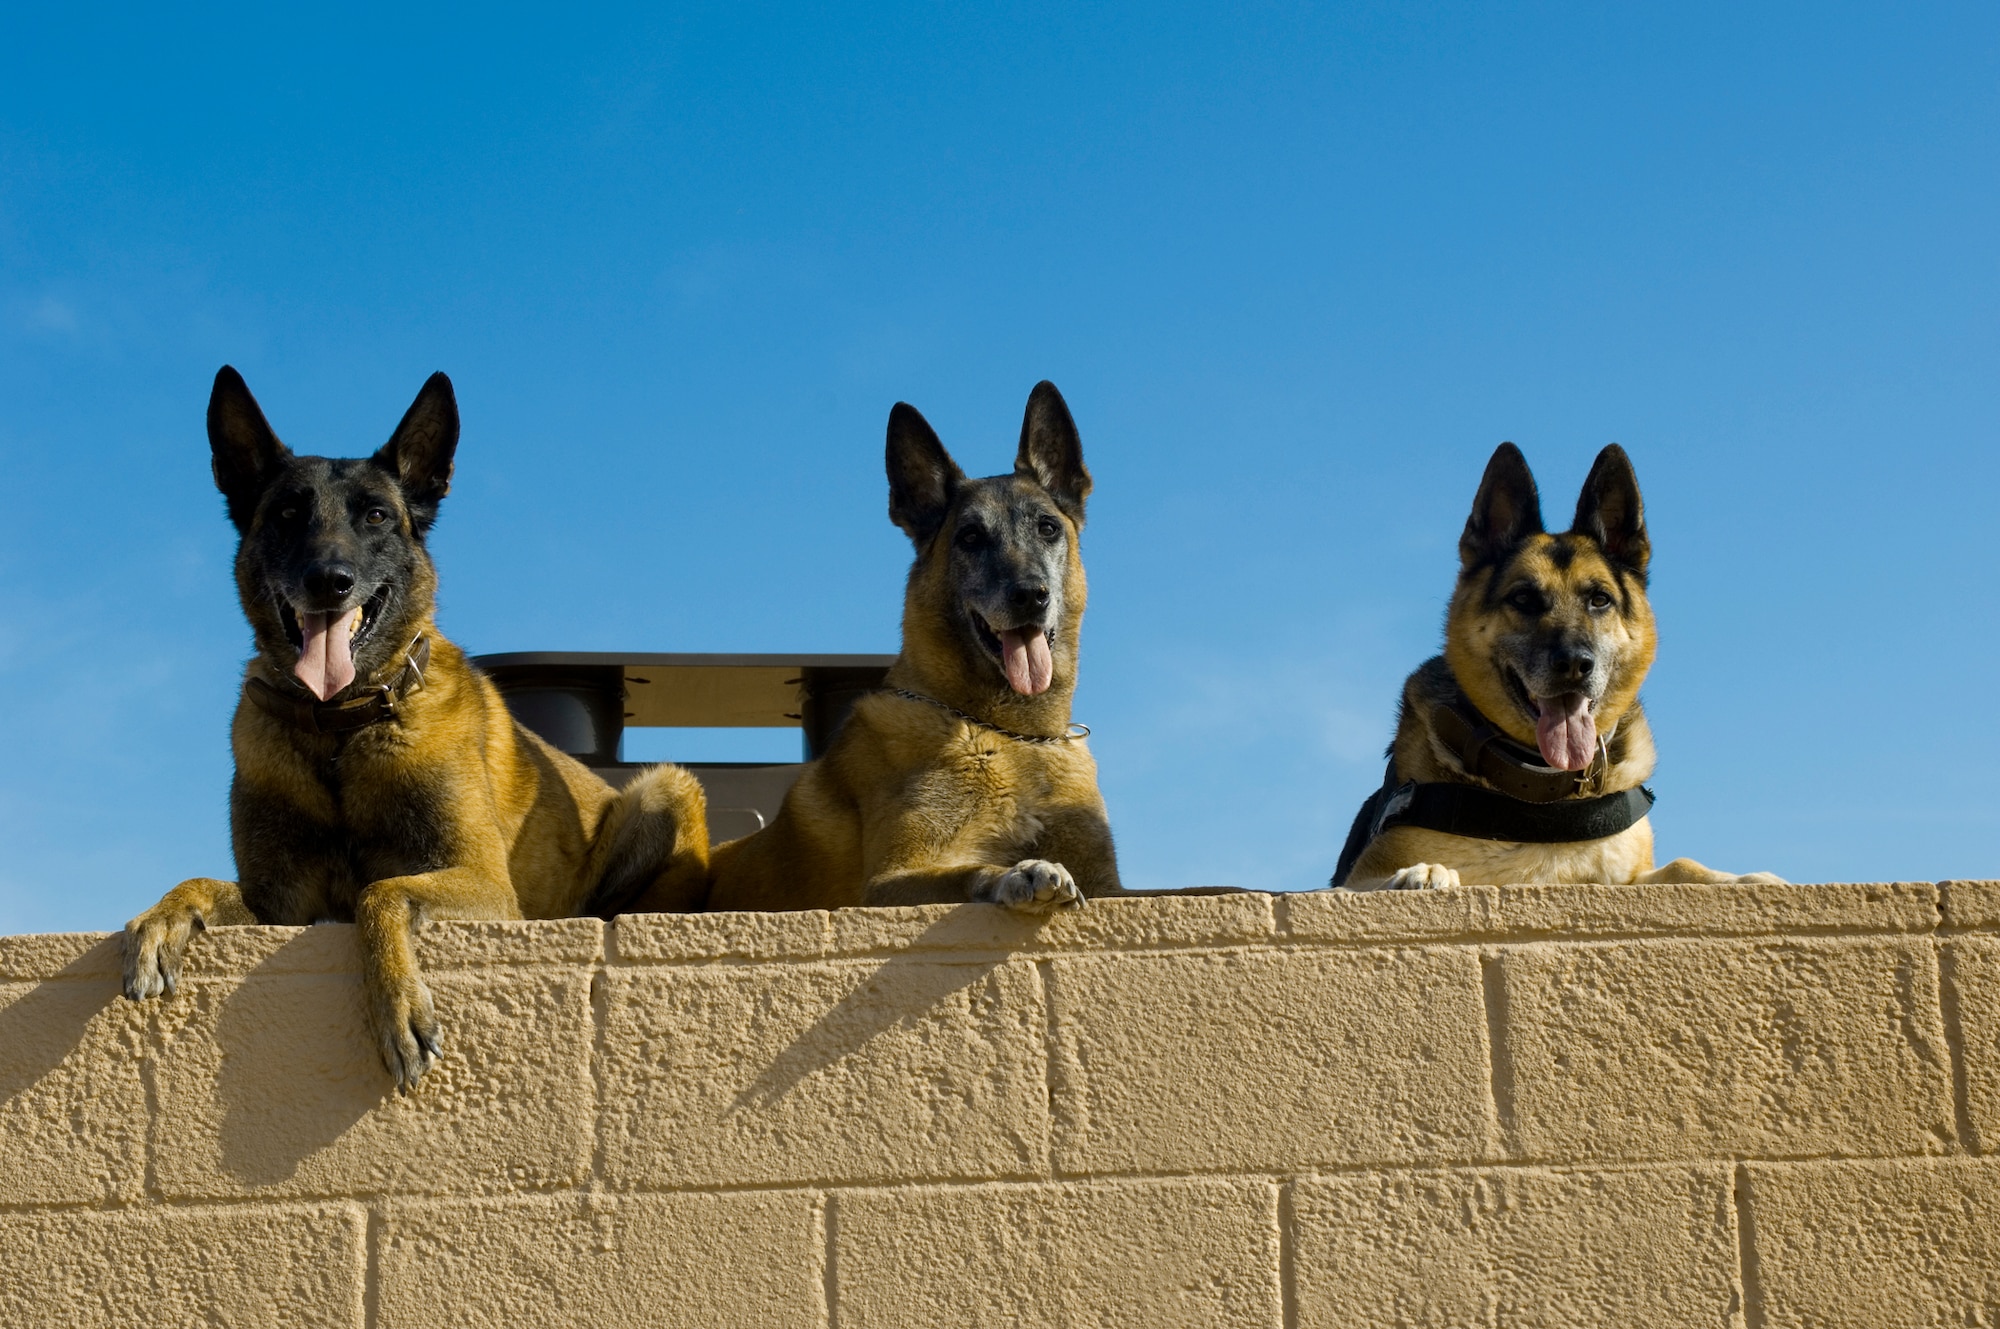 Roc, Kisma and Jampy, military working dogs assigned to the 56th Security Forces Squadron, take a rest at the Military Working Dog kennels at Luke Air Force Base, Ariz., March 25, 2010. (U.S. Air Force photo/Staff Sgt. Jason Colbert)